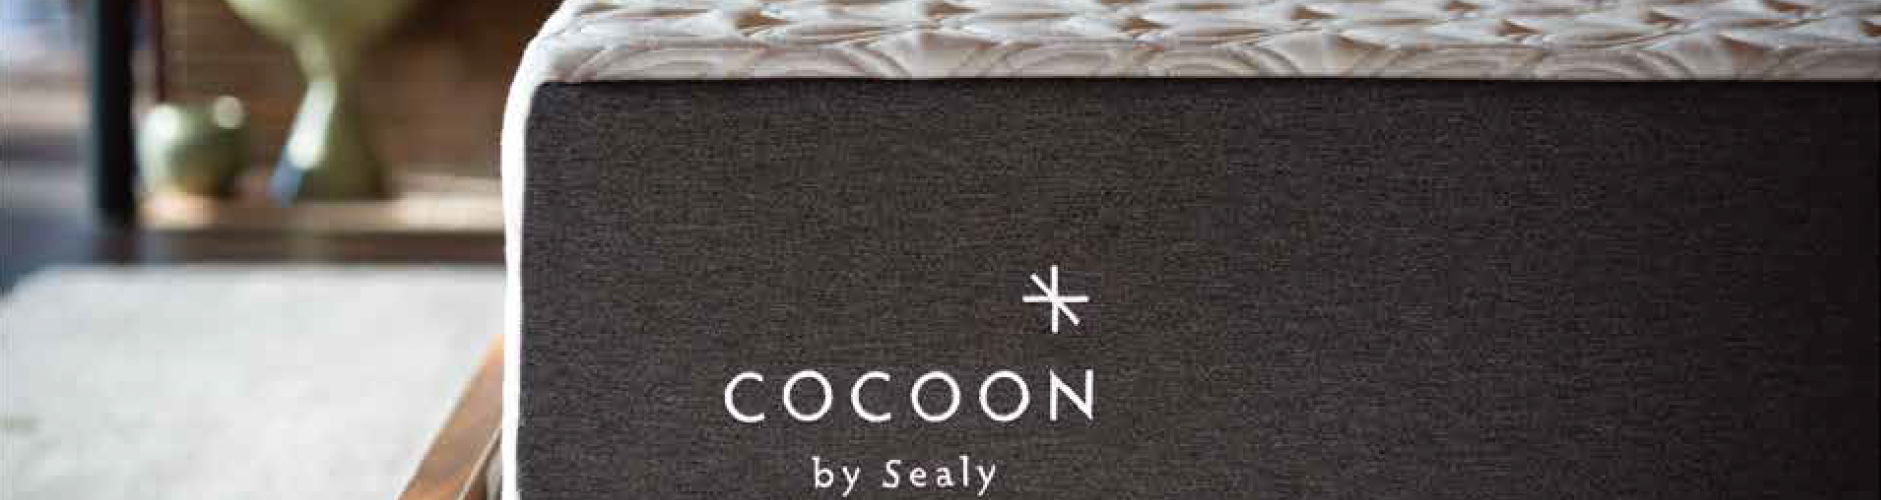 cocoon Friends